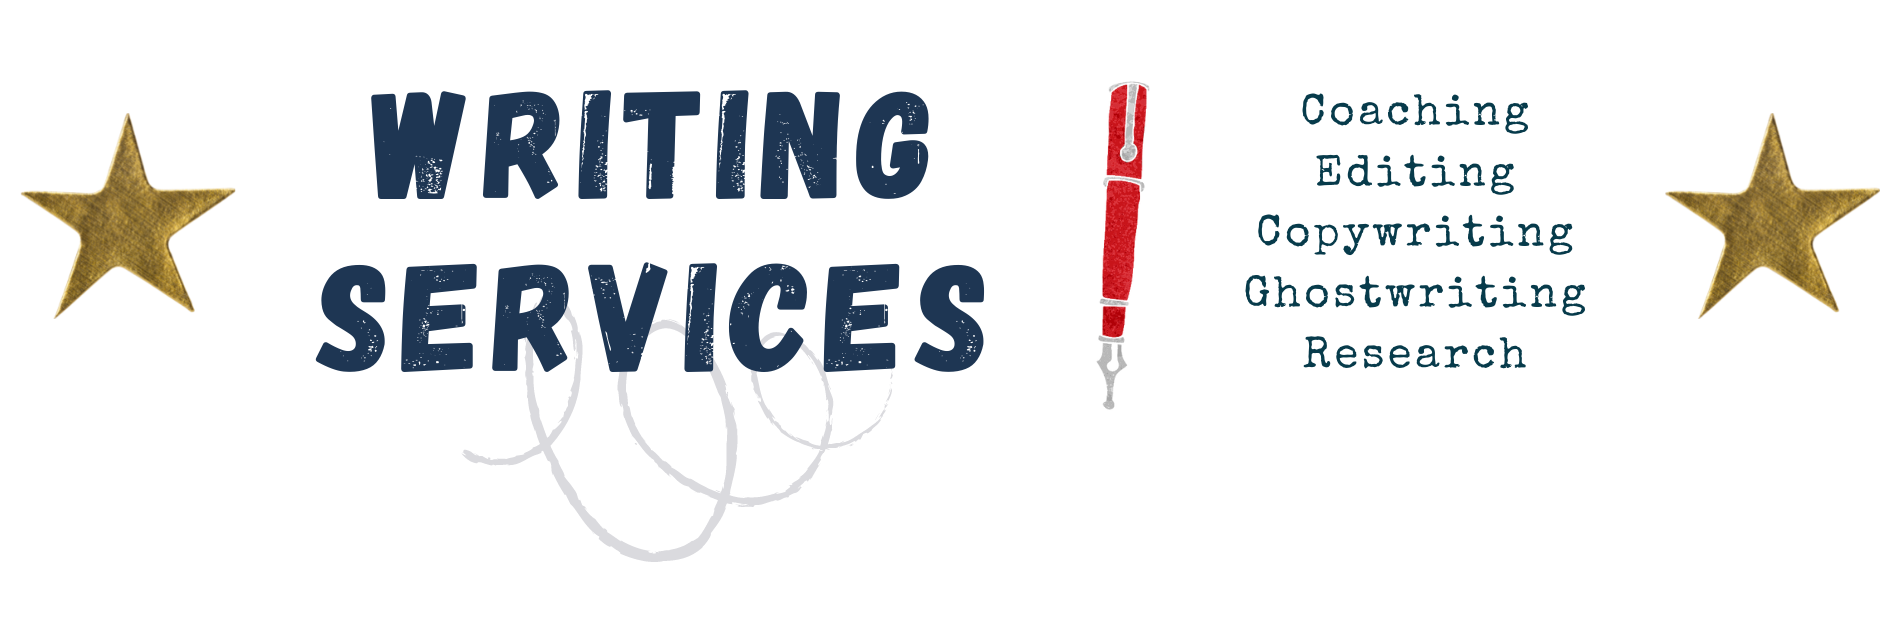 Sean Coons - writing services banner - 002